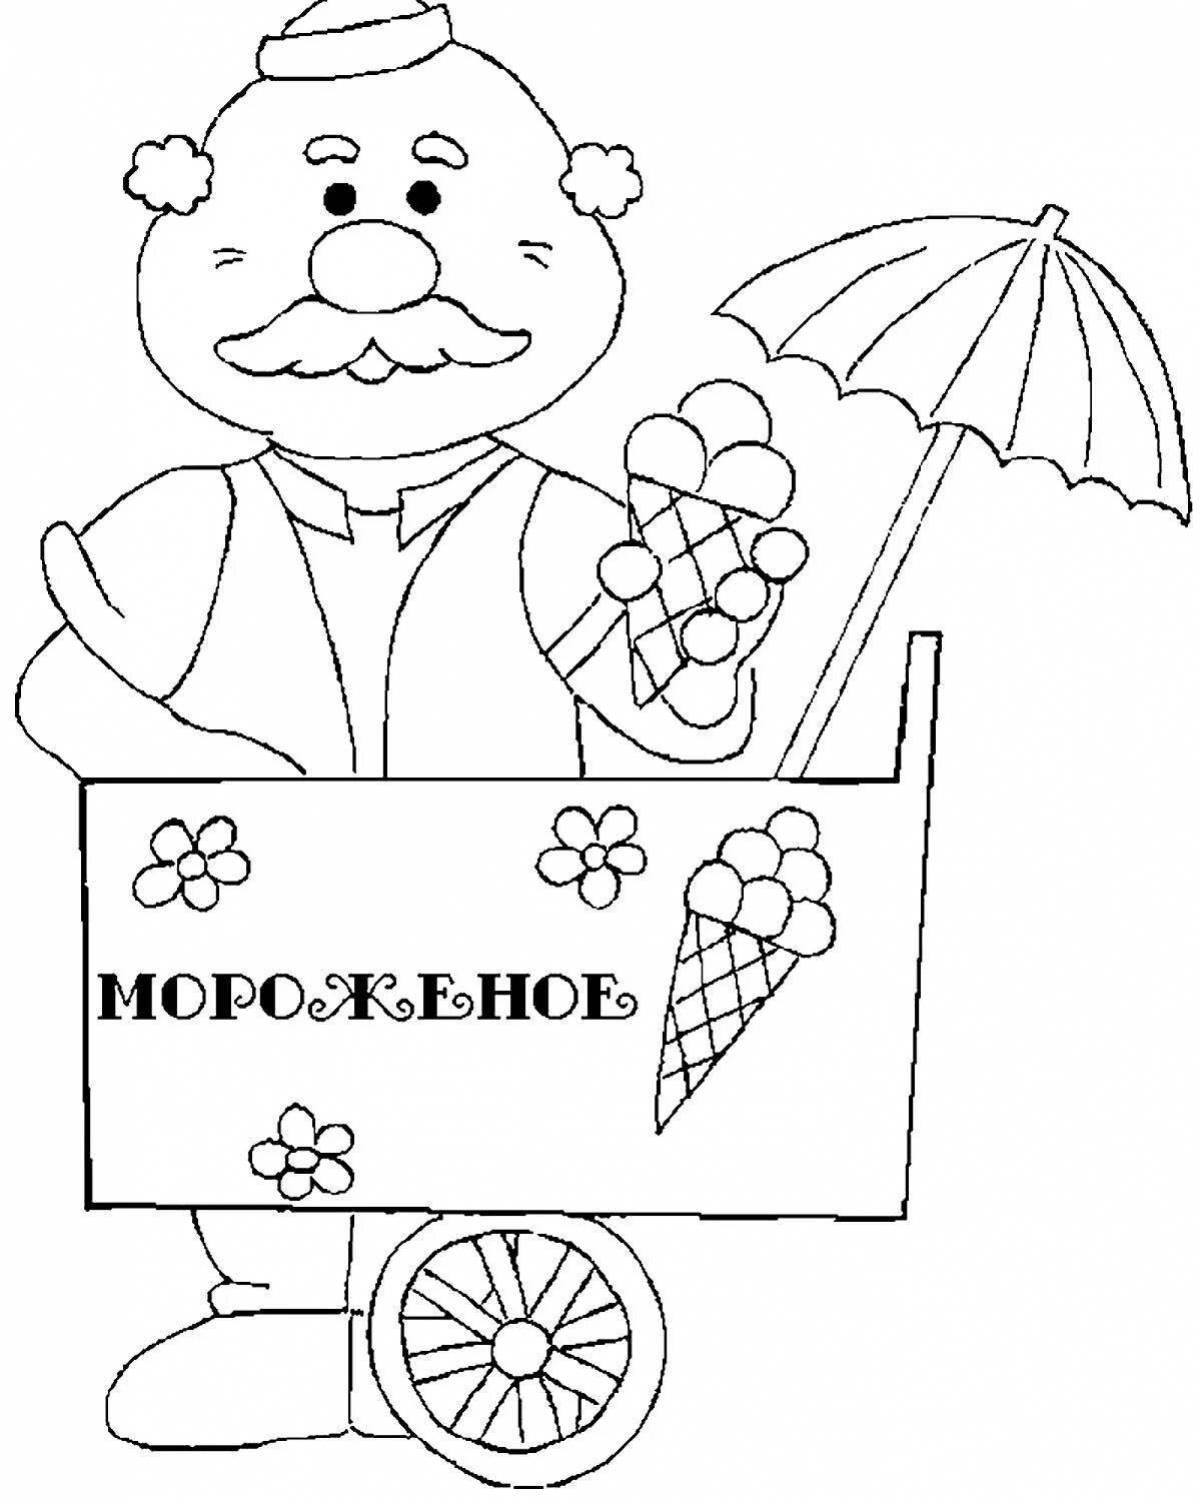 Exuberant advertising coloring page